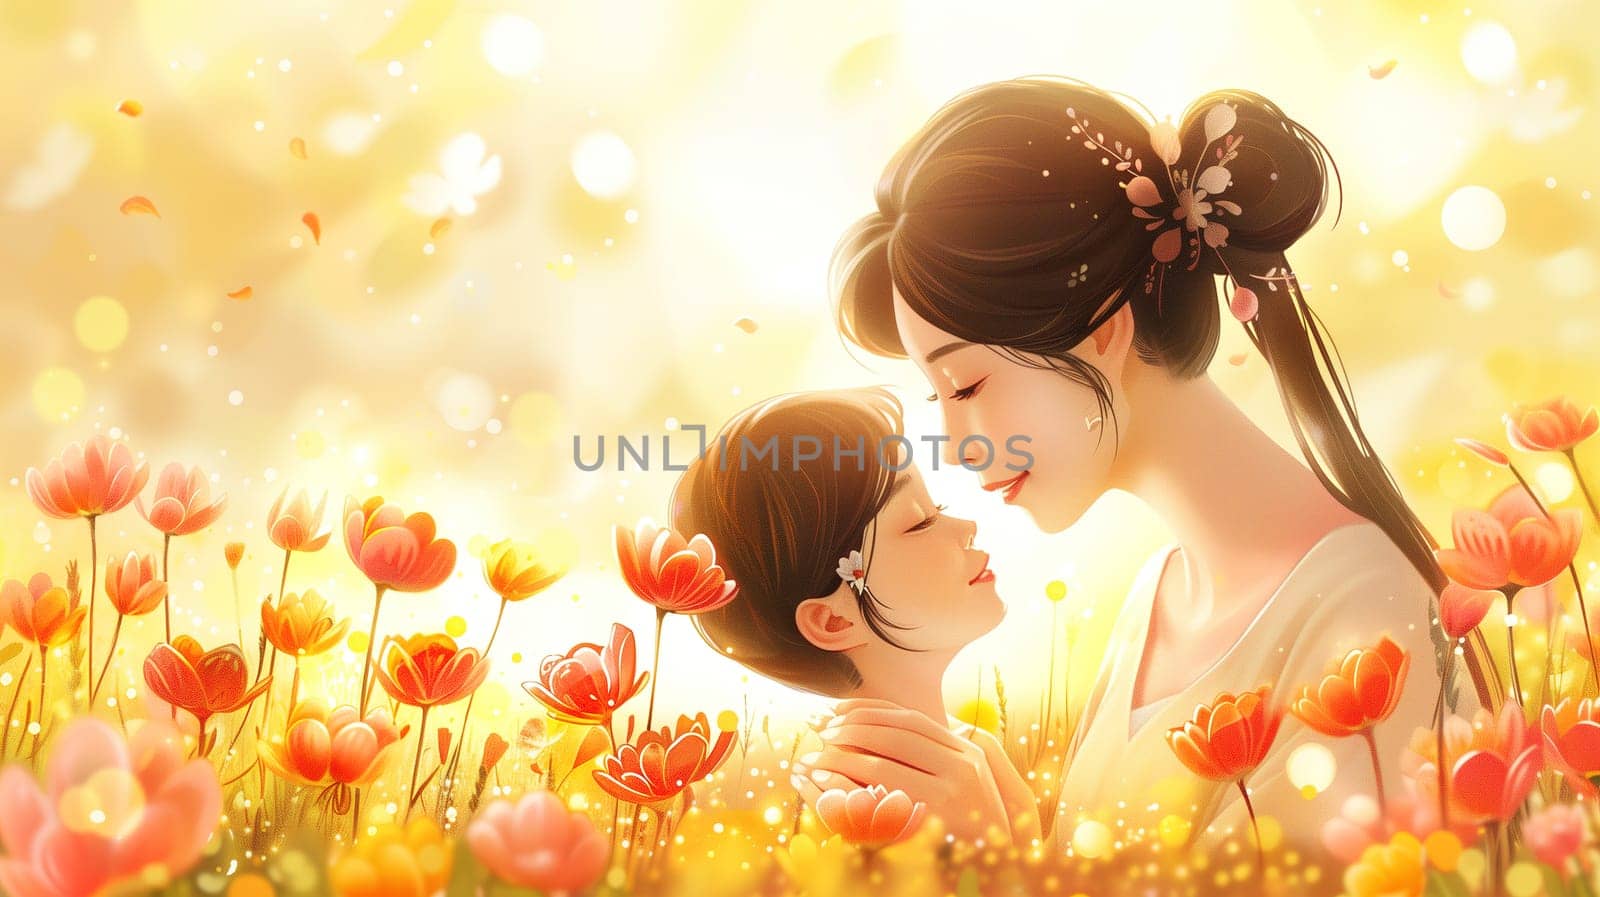 A woman standing in a field of colorful flowers, holding a young child in her arms. The child is looking up at the woman, both surrounded by a carpet of vibrant blooms.